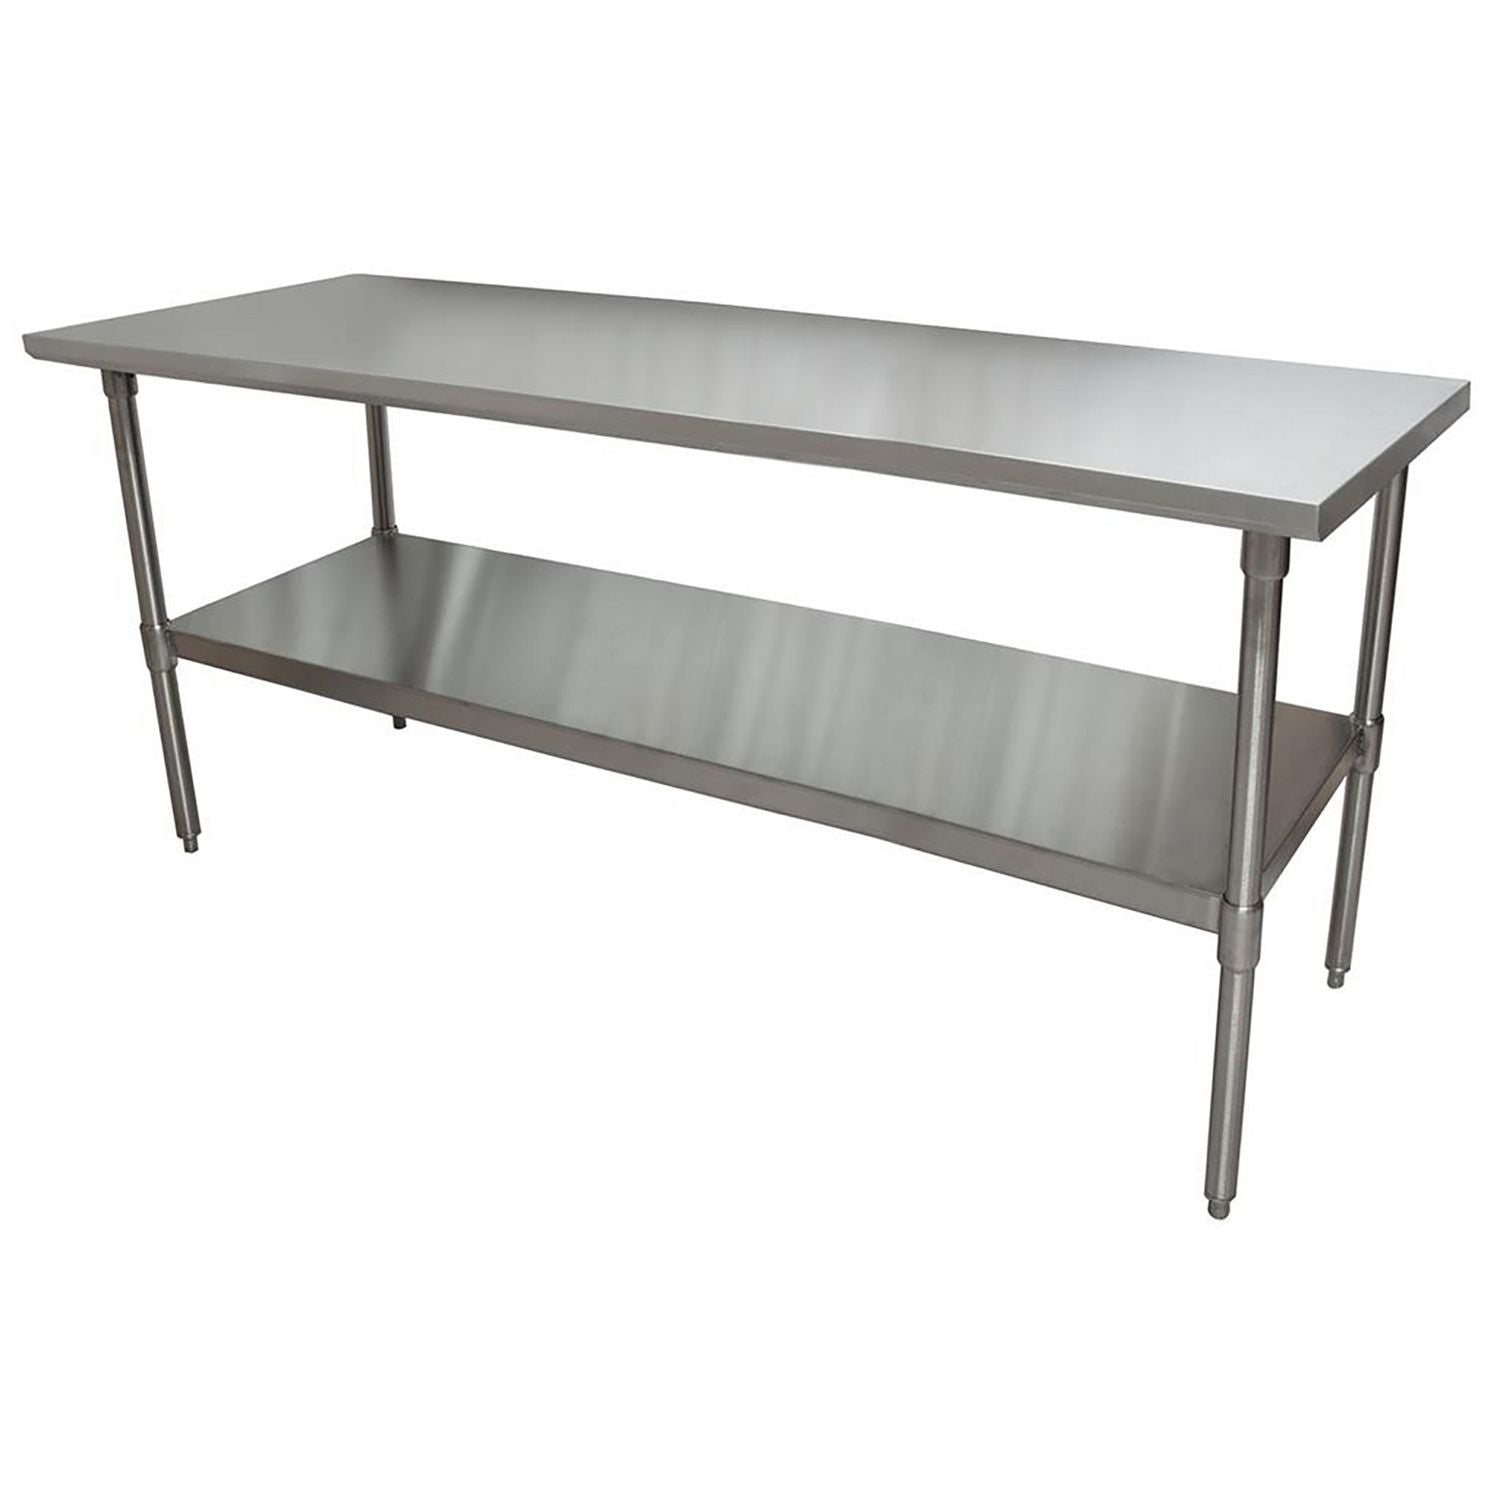 stainless-steel-flat-top-work-tables-72w-x-30d-x-36h-silver-2-pallet-ships-in-4-6-business-days_bke2vt7230 - 8